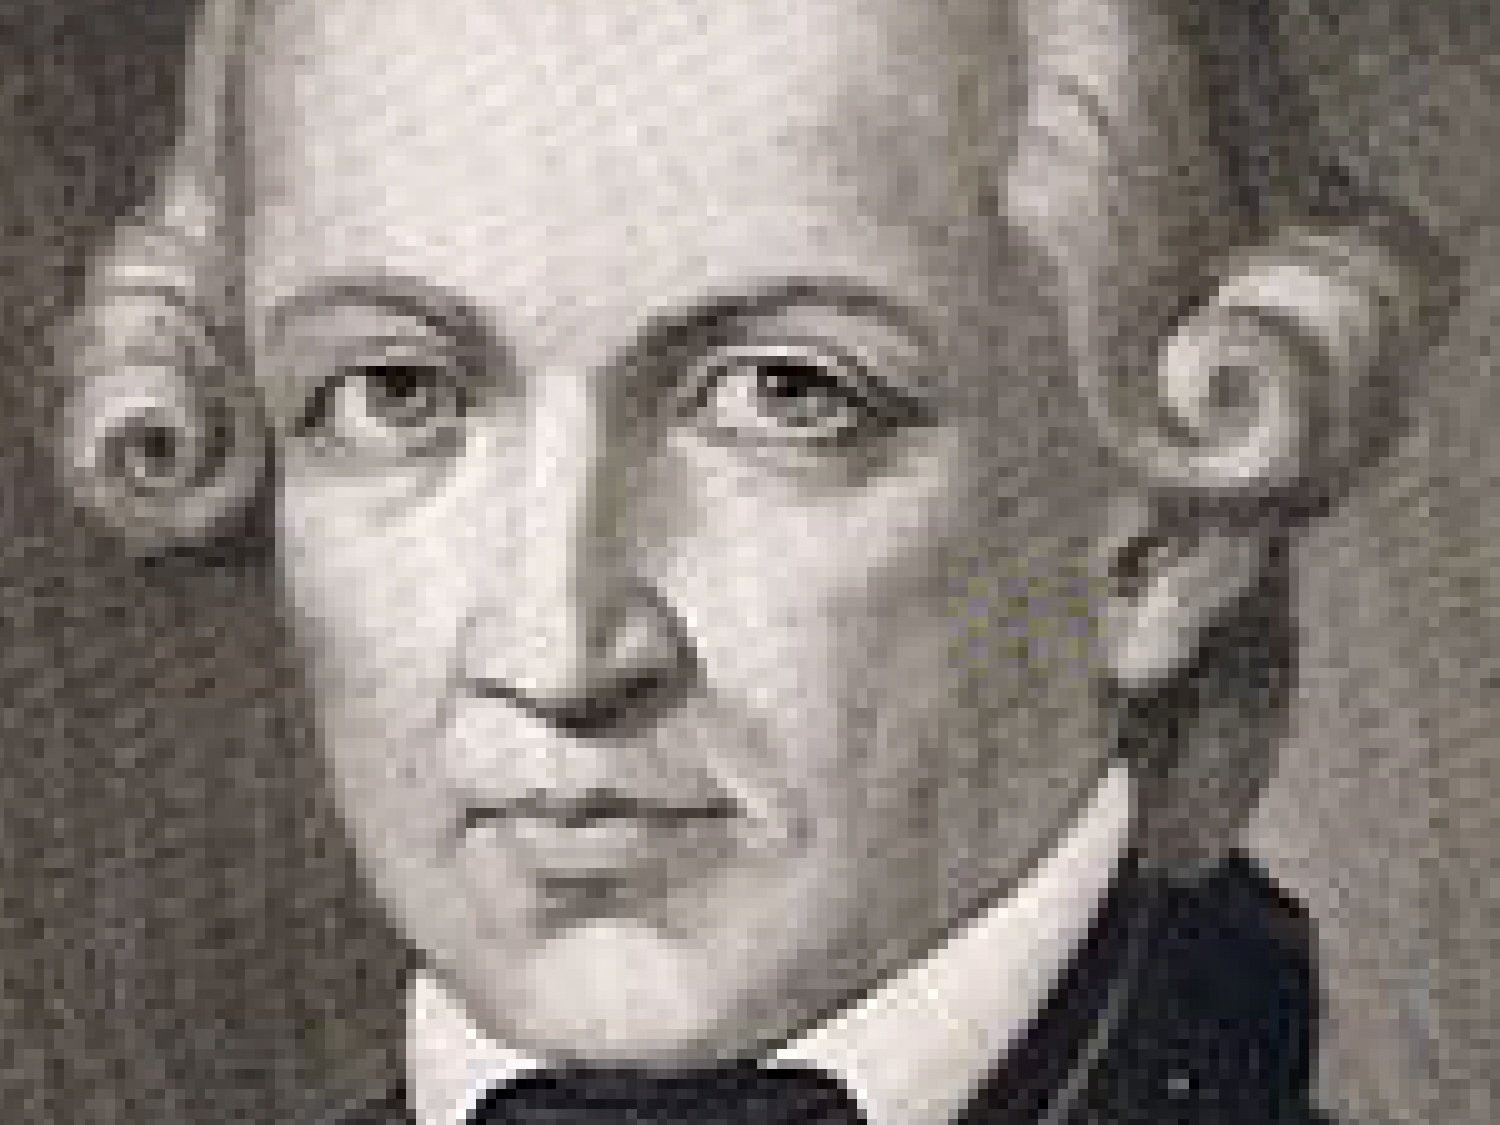 Order paper analyzing the political thoughts of immanuel kant and g.w.f. hegel